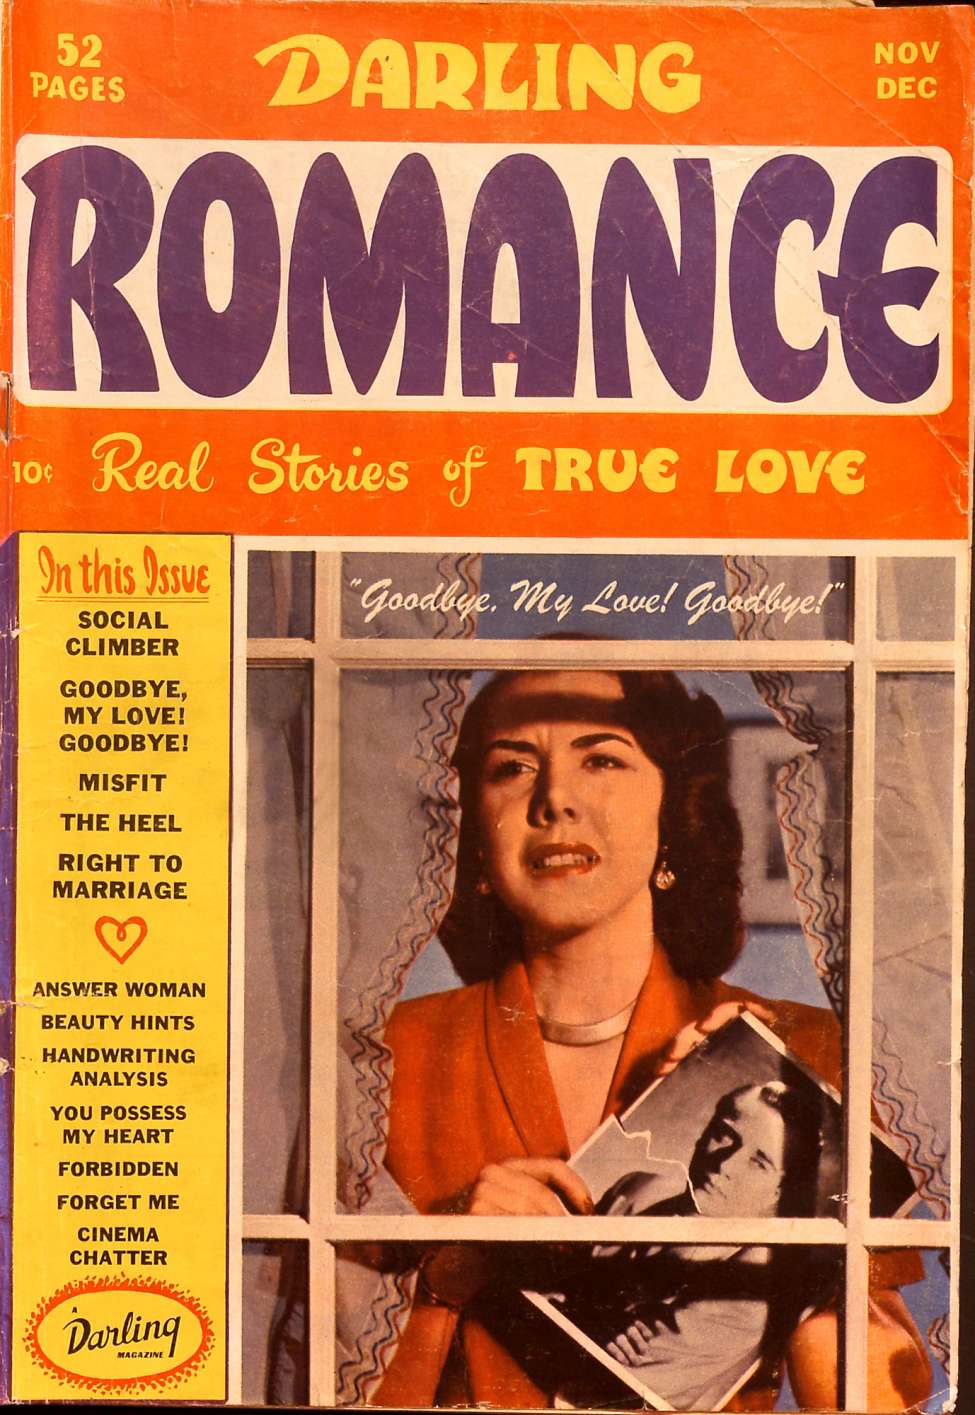 Book Cover For Darling Romance 2